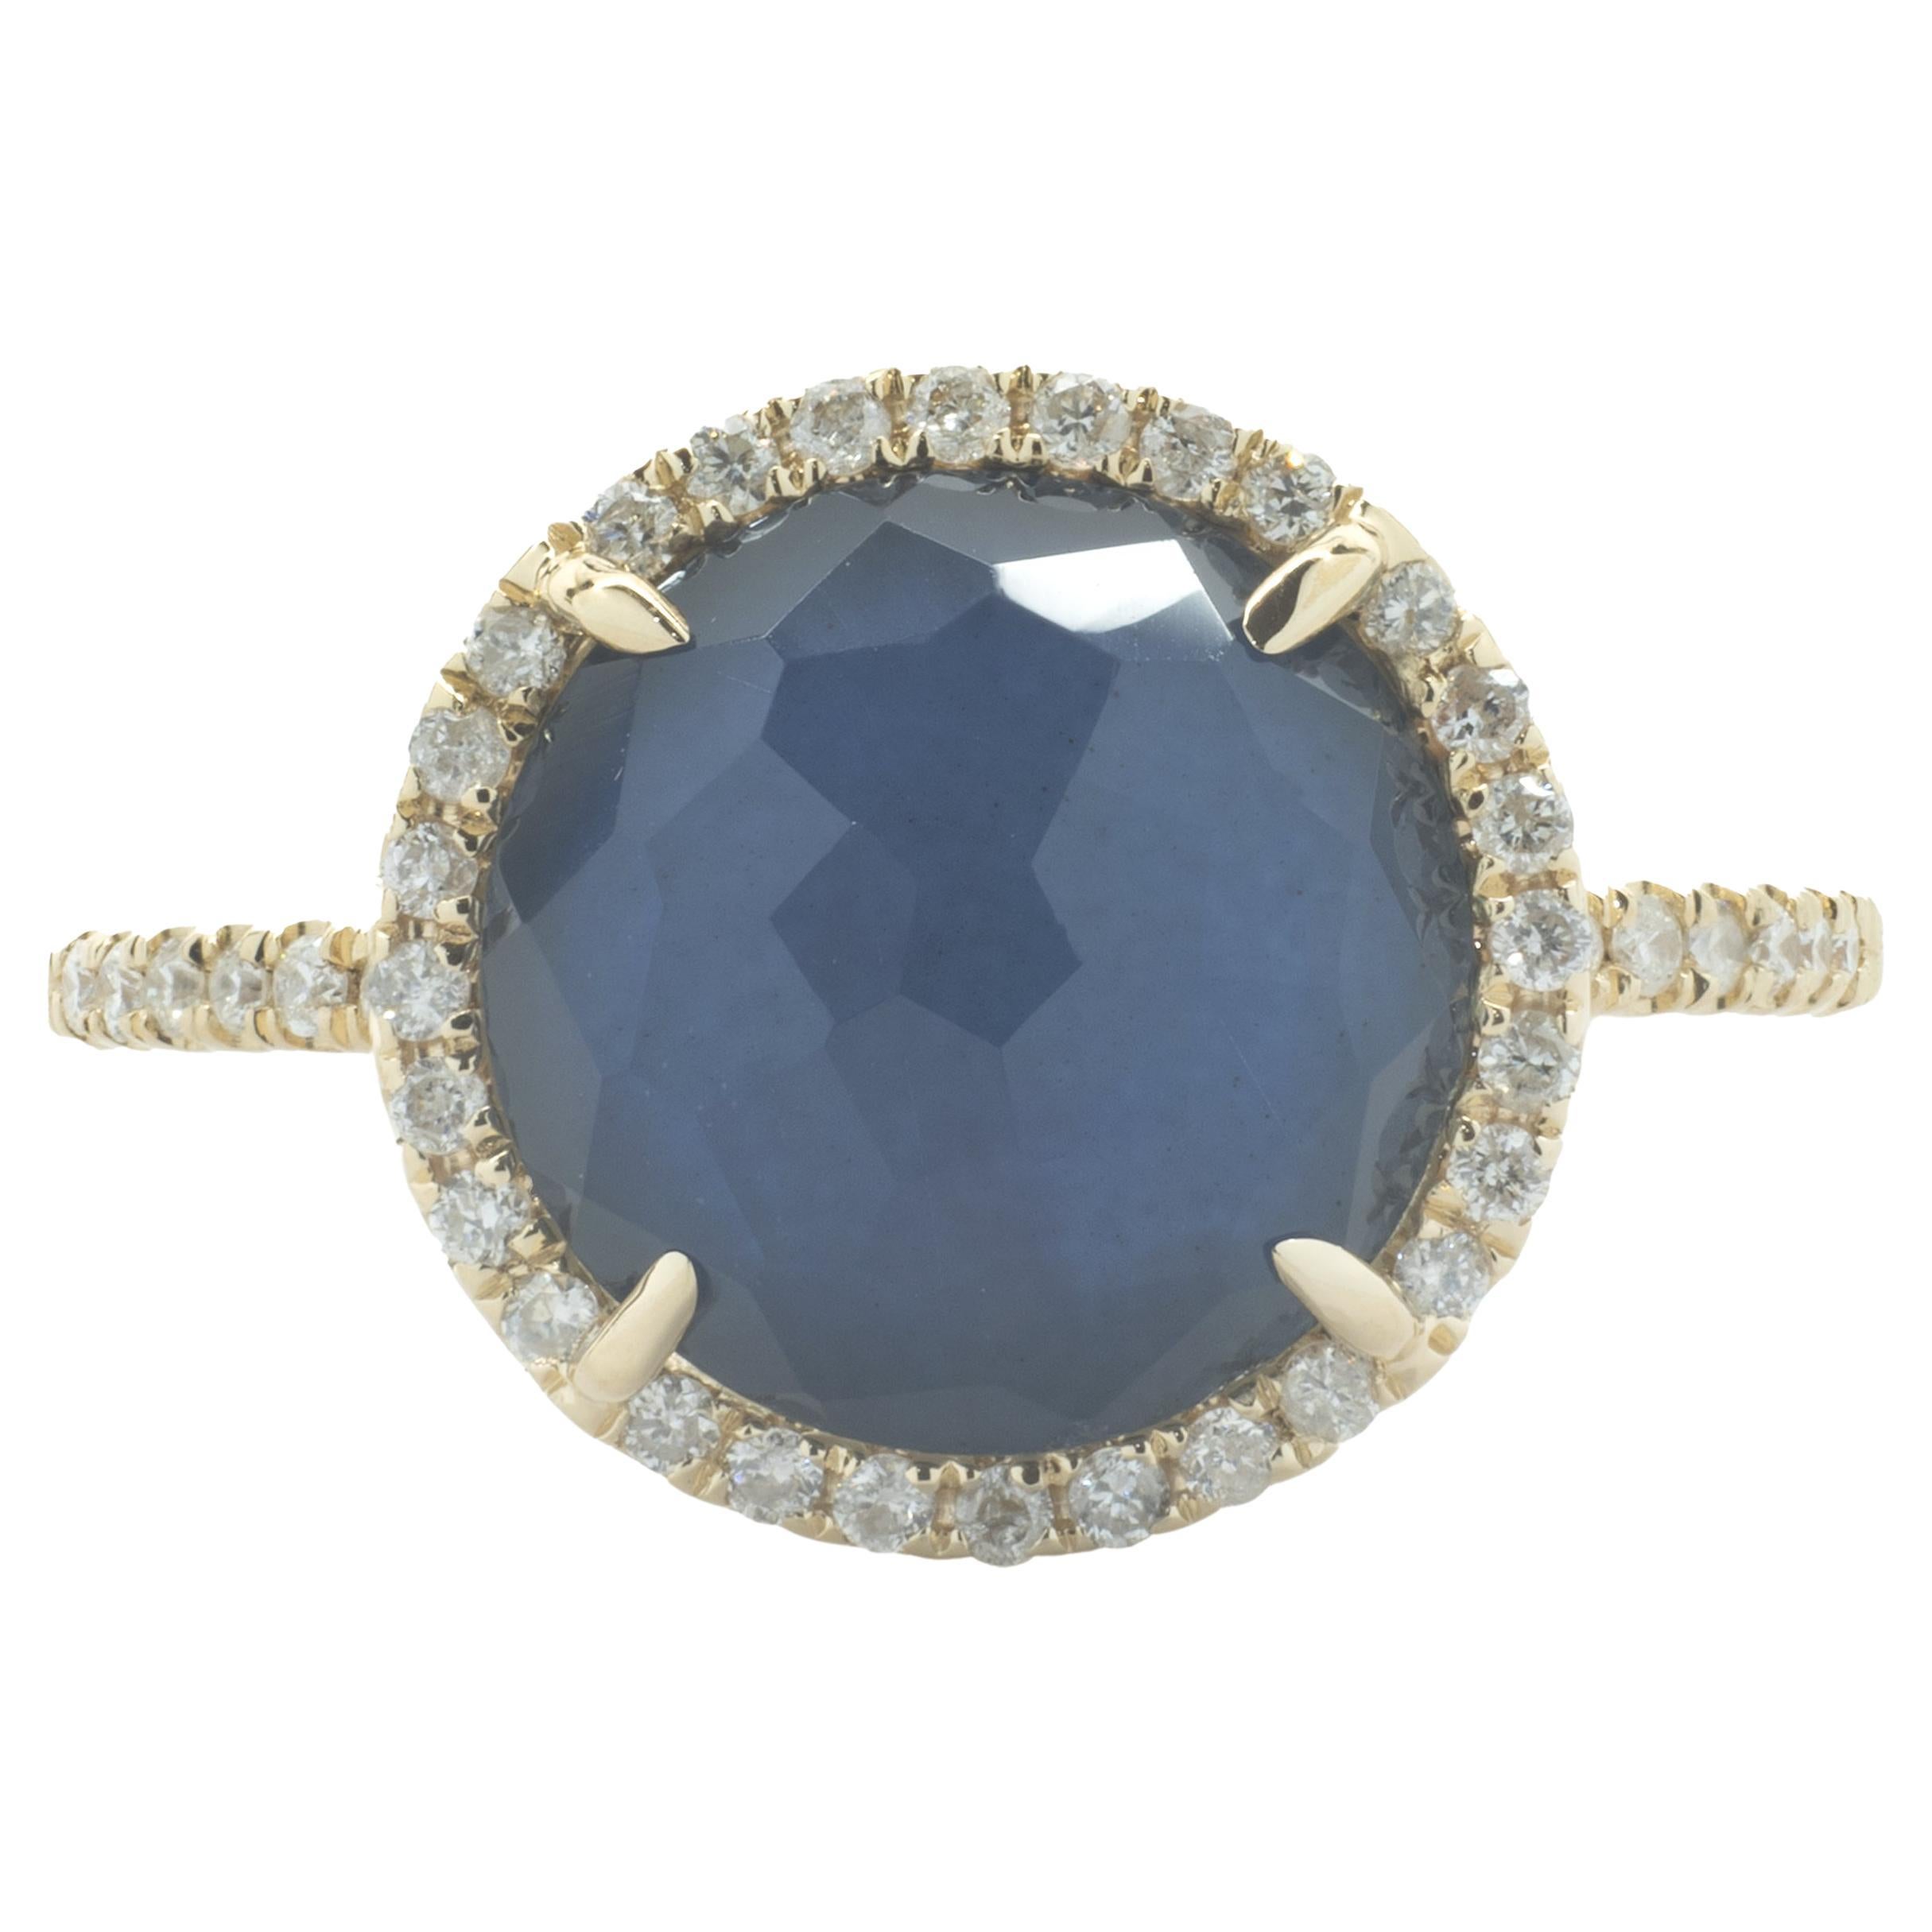 14 Karat Yellow Gold Diamond, Mother of Pearl, and Blue Quartz Rock Candy Ring